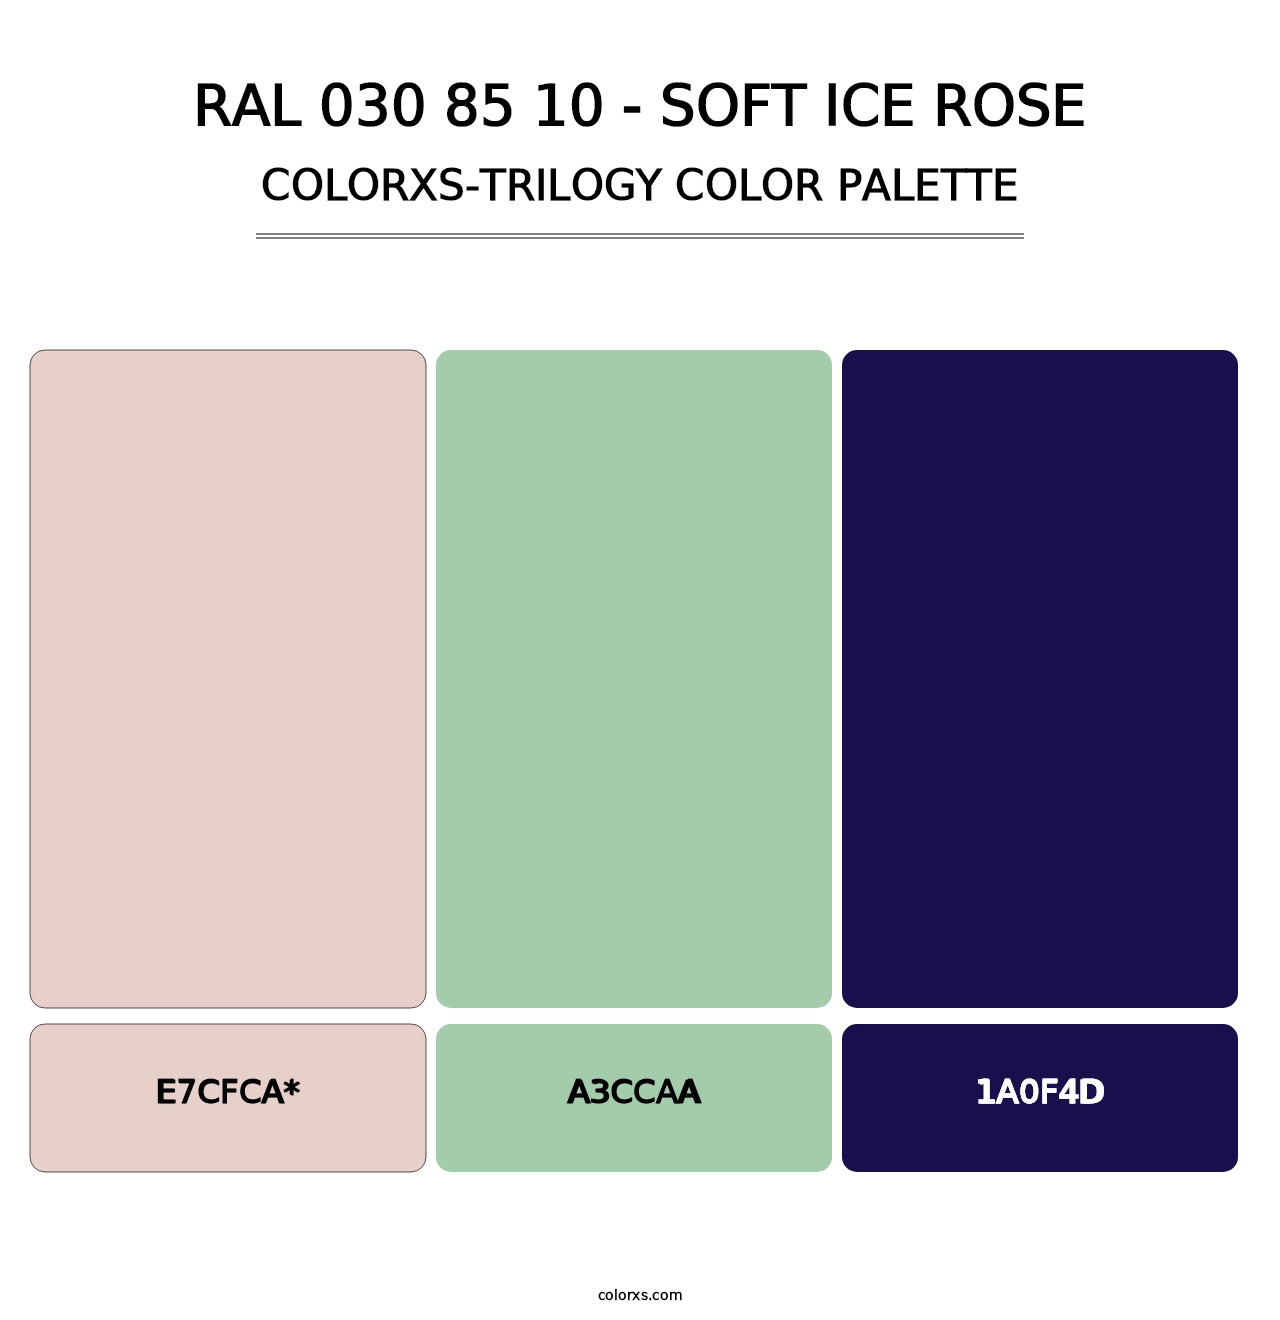 RAL 030 85 10 - Soft Ice Rose - Colorxs Trilogy Palette